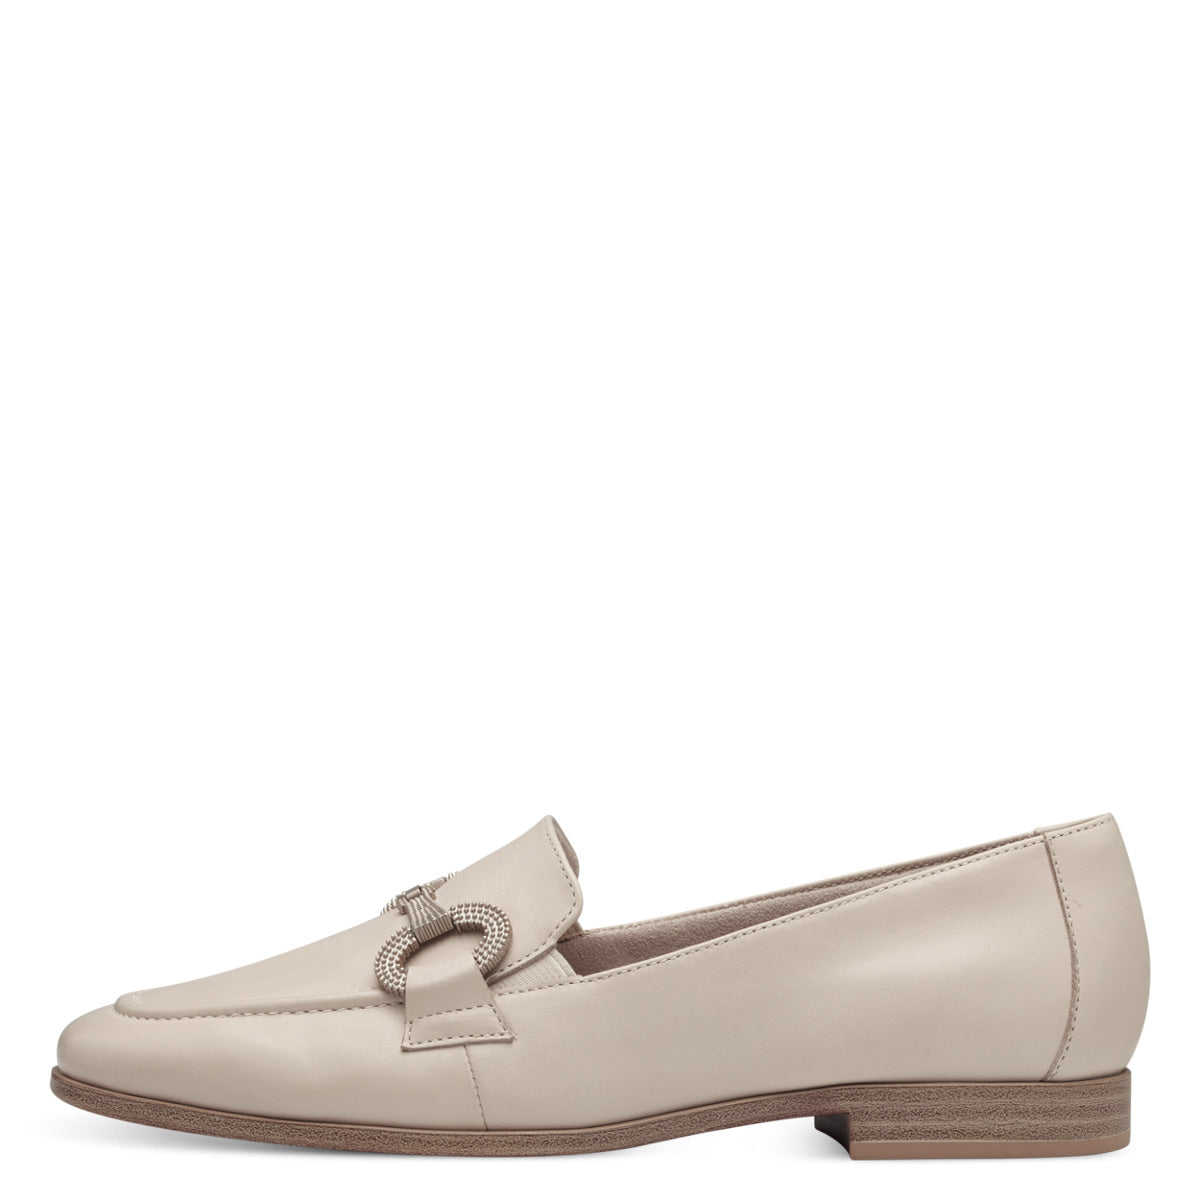 Tamaris Beige Loafer with Sleek Chain Detail and Comfort Technology